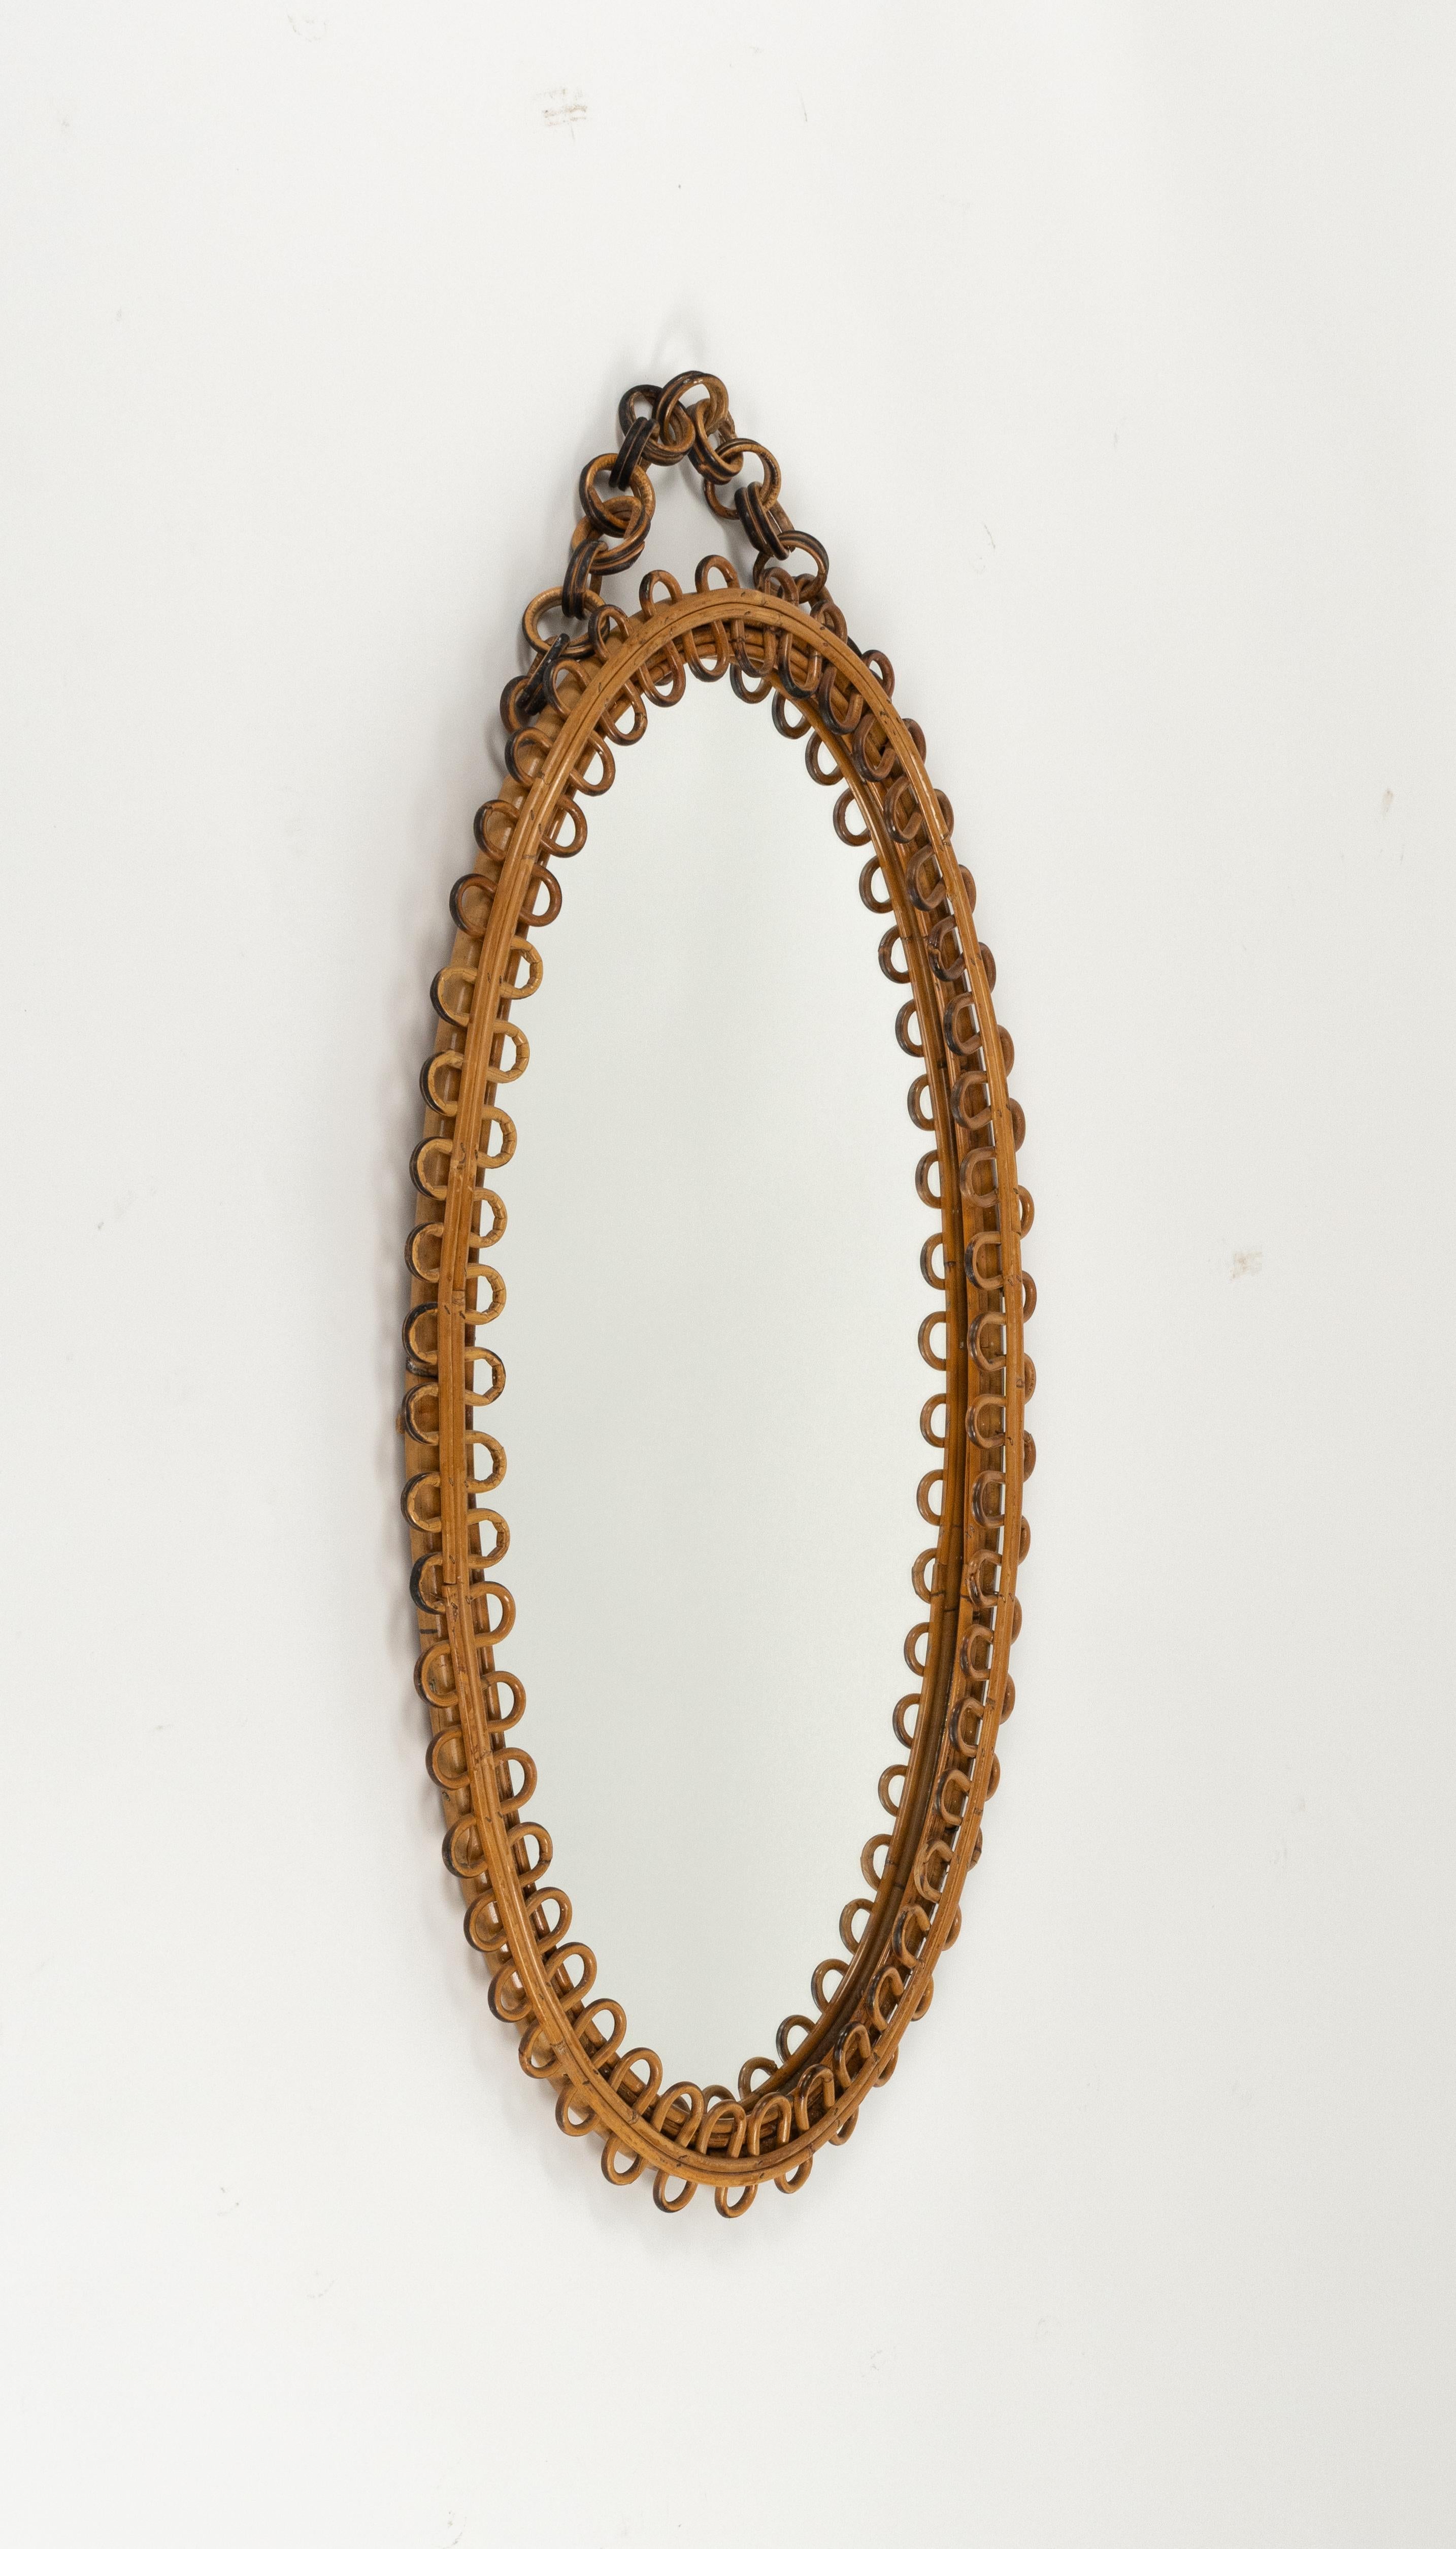 Italian Rattan and Bamboo Oval Wall Mirror with Chain Franco Albini Style, Italy, 1960s For Sale